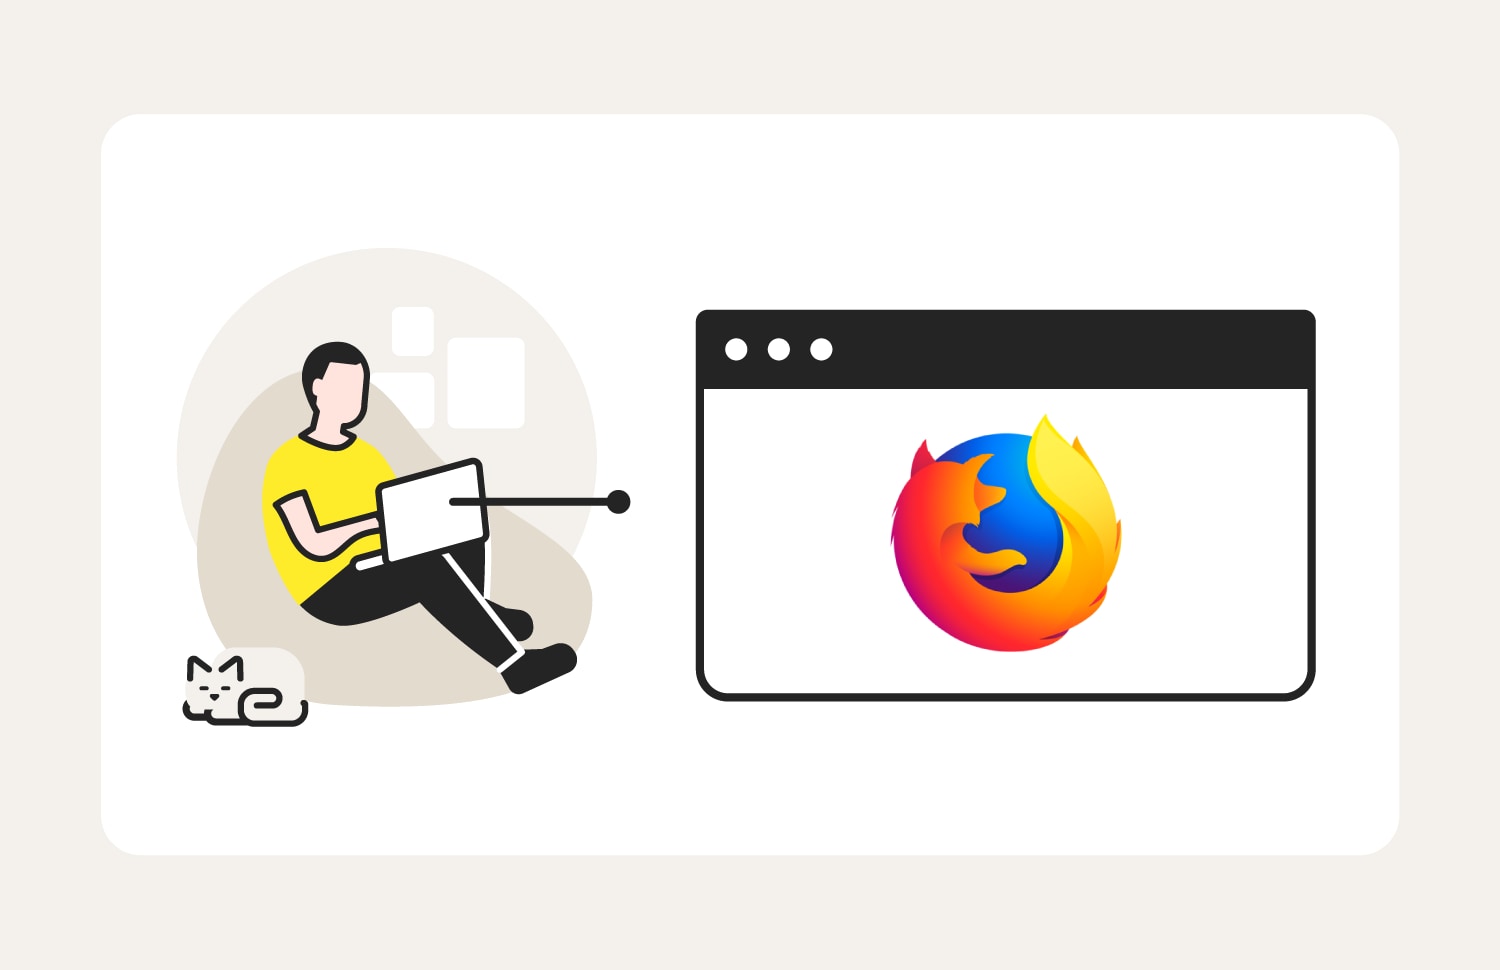 An illustration introduces the steps for how to clear cookies on FireFox.